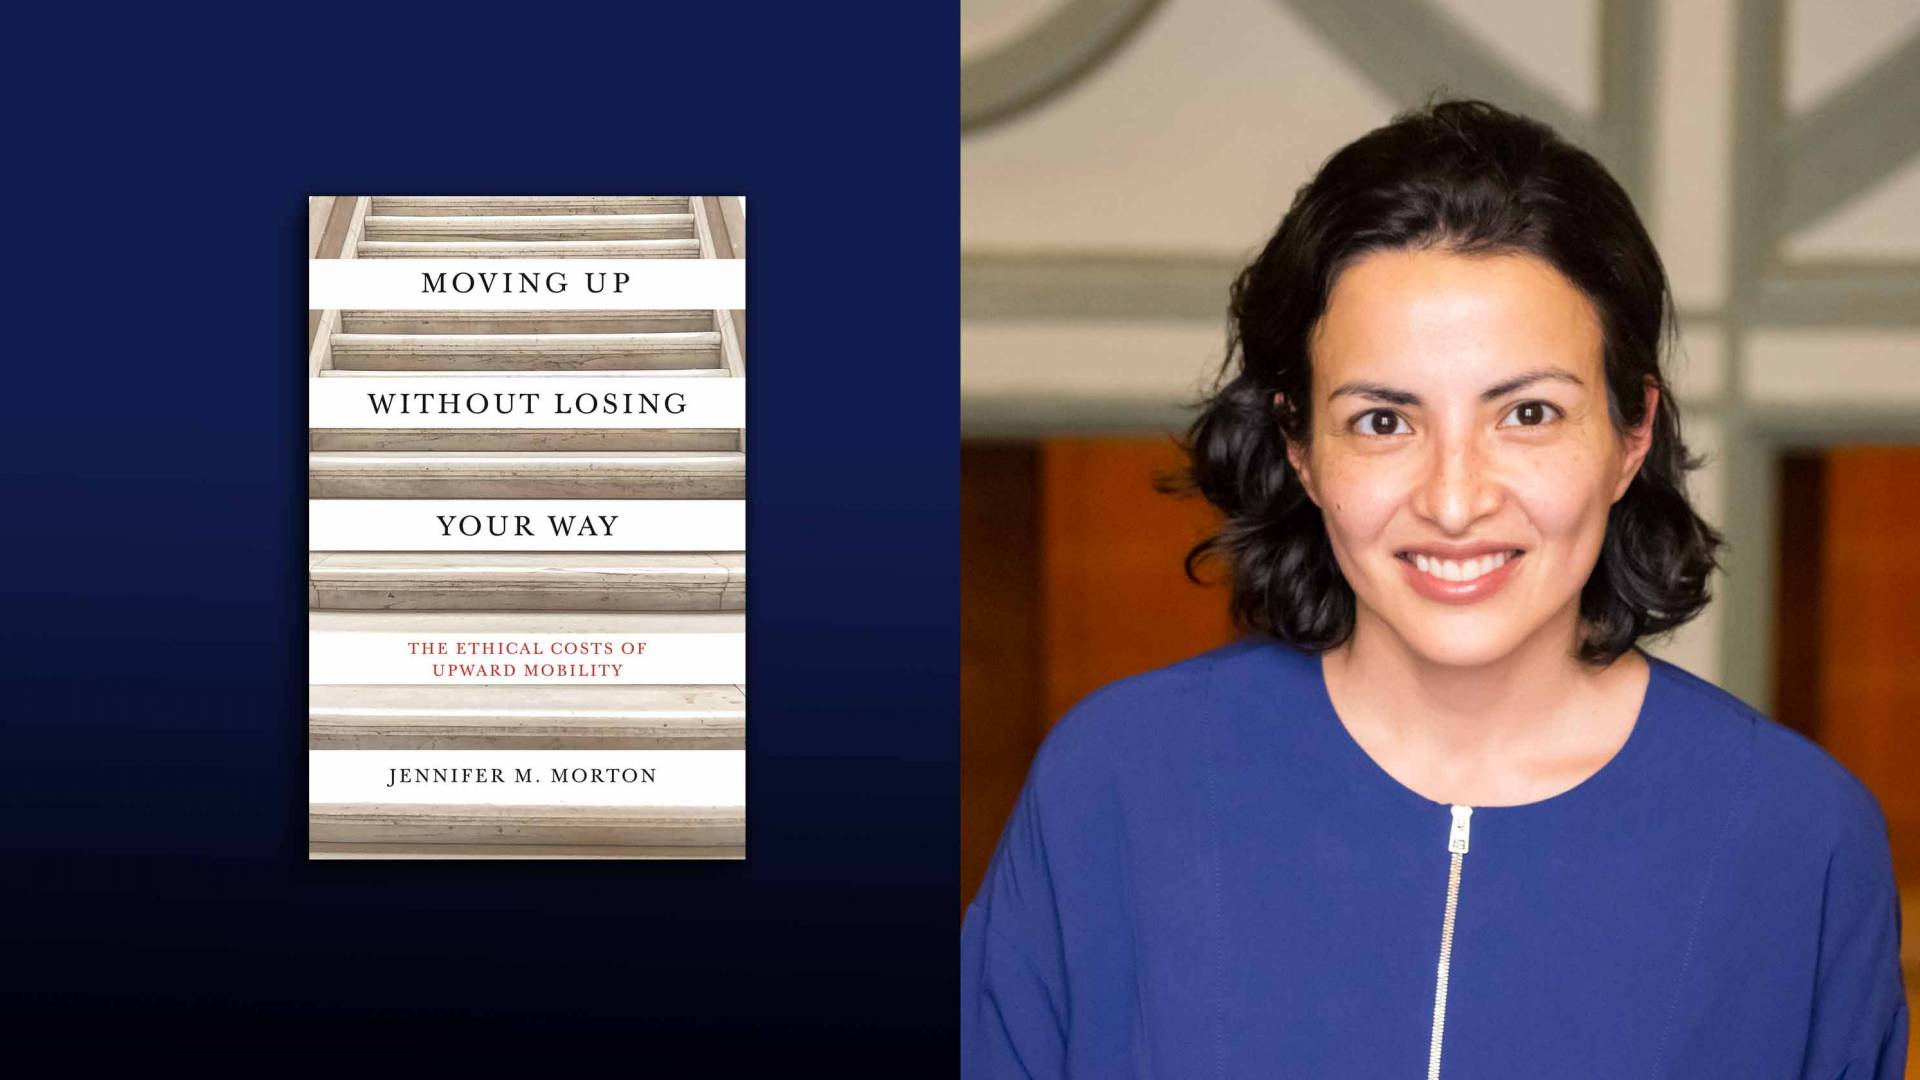 Cover of book "Moving Up Without Losing Your Way: The Ethical Costs of Upward Mobility" by Jennifer M. Morton and a portrait of Jennifer Morton